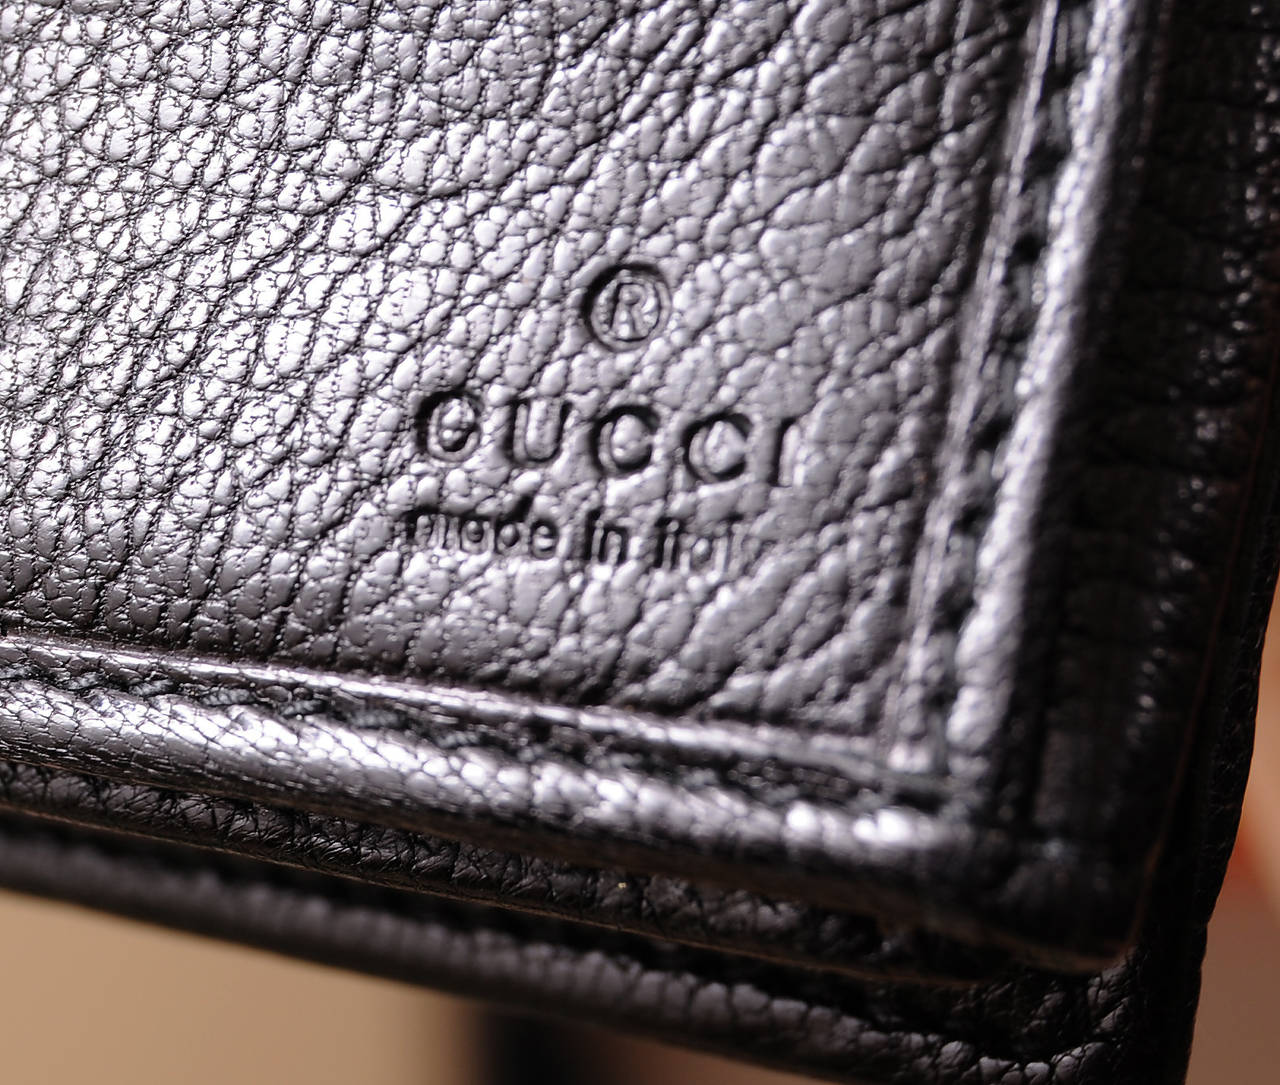 Gucci Studded Logo Black Leather Wallet For Sale at 1stdibs